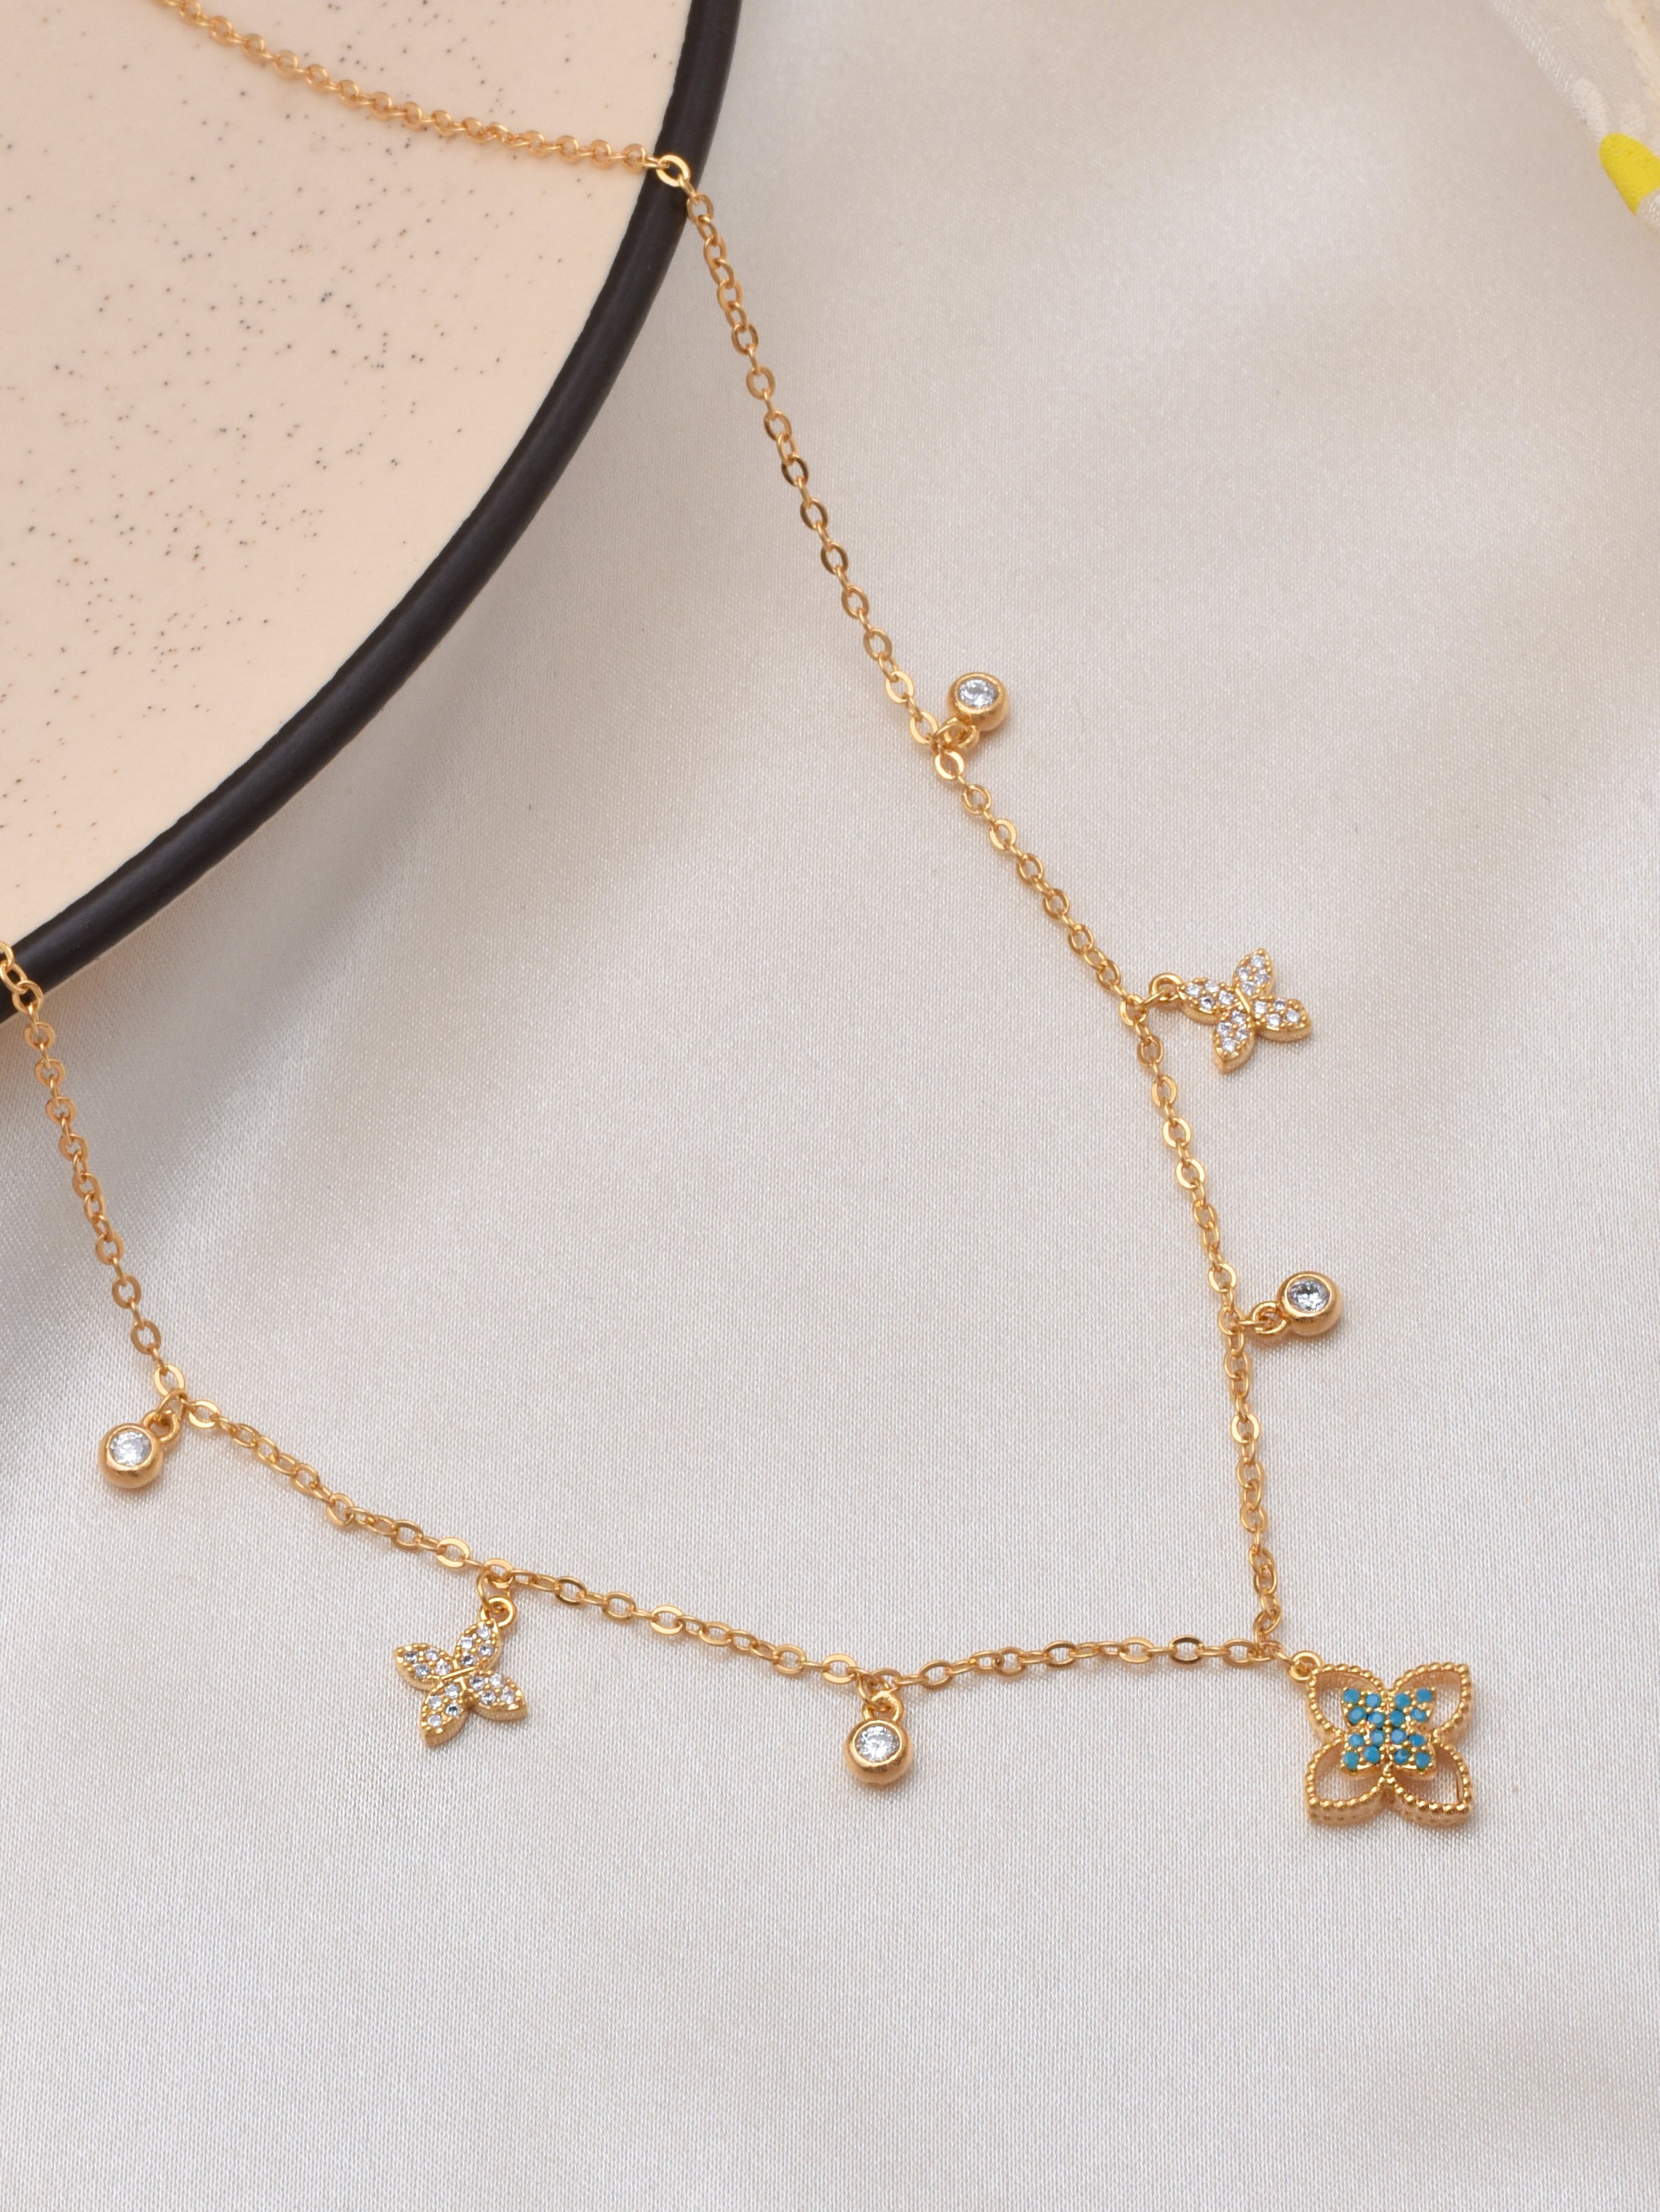 Glamorous Clover Charms Necklace